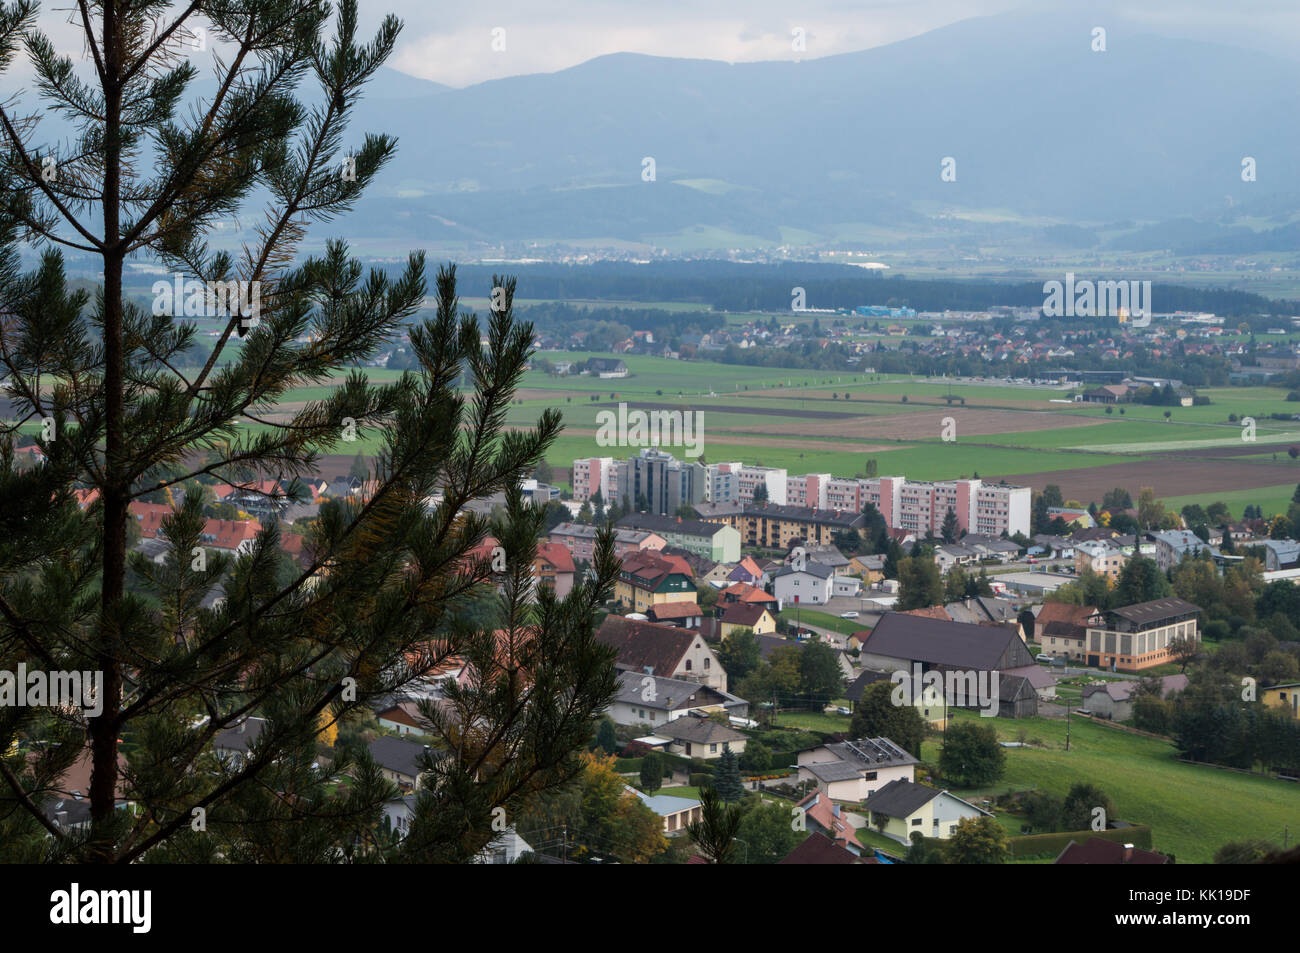 The Mur river valley seen from a hill overlooking the village of Fohnsdorf, Austria Stock Photo